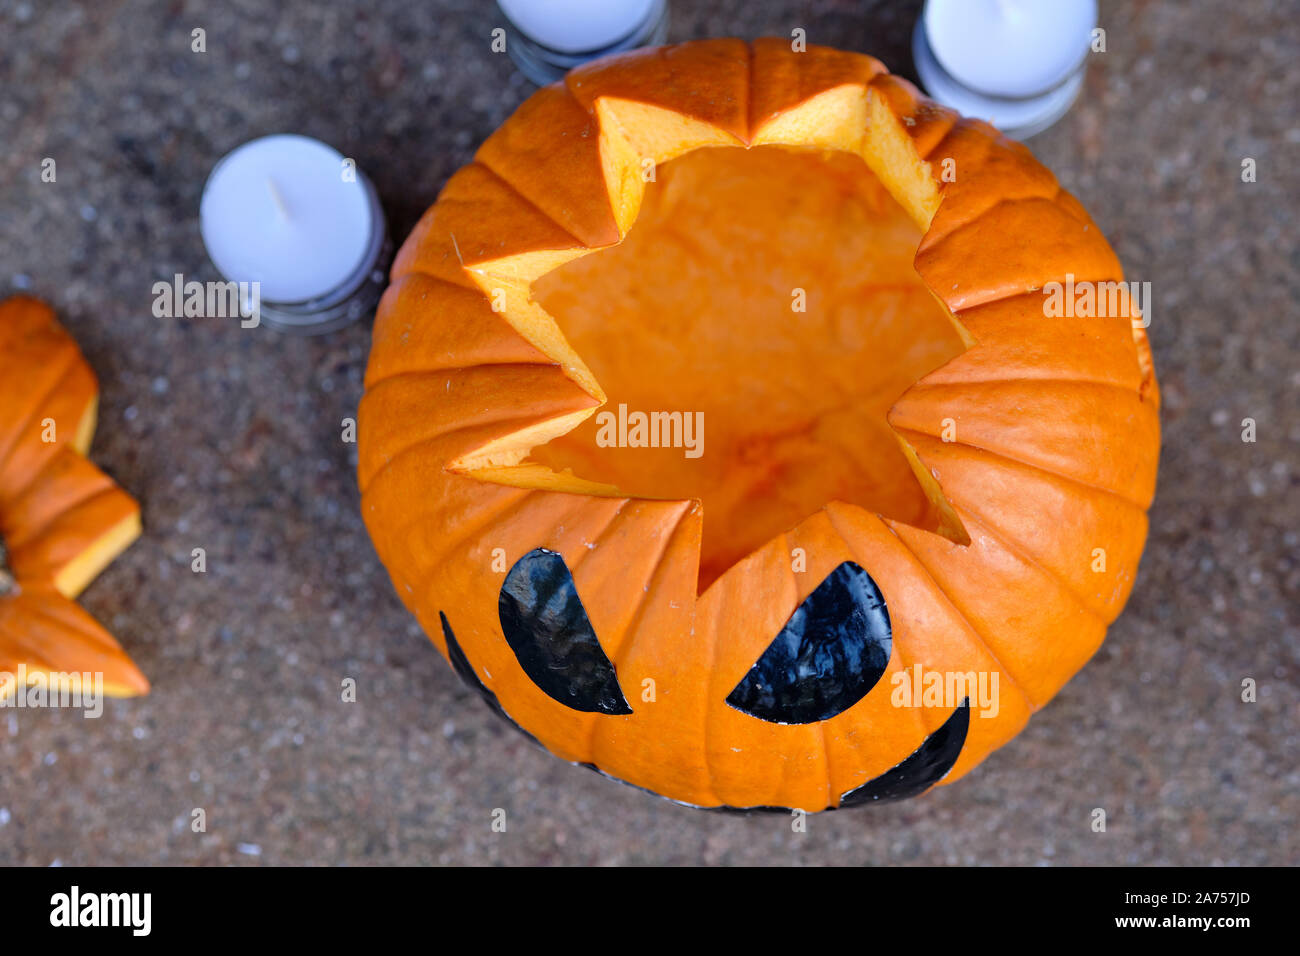 Smiling orange Halloween pumpkin lying on the ground together with some tea lights in the background. Seen in Germany, Bavaria, in October. Stock Photo